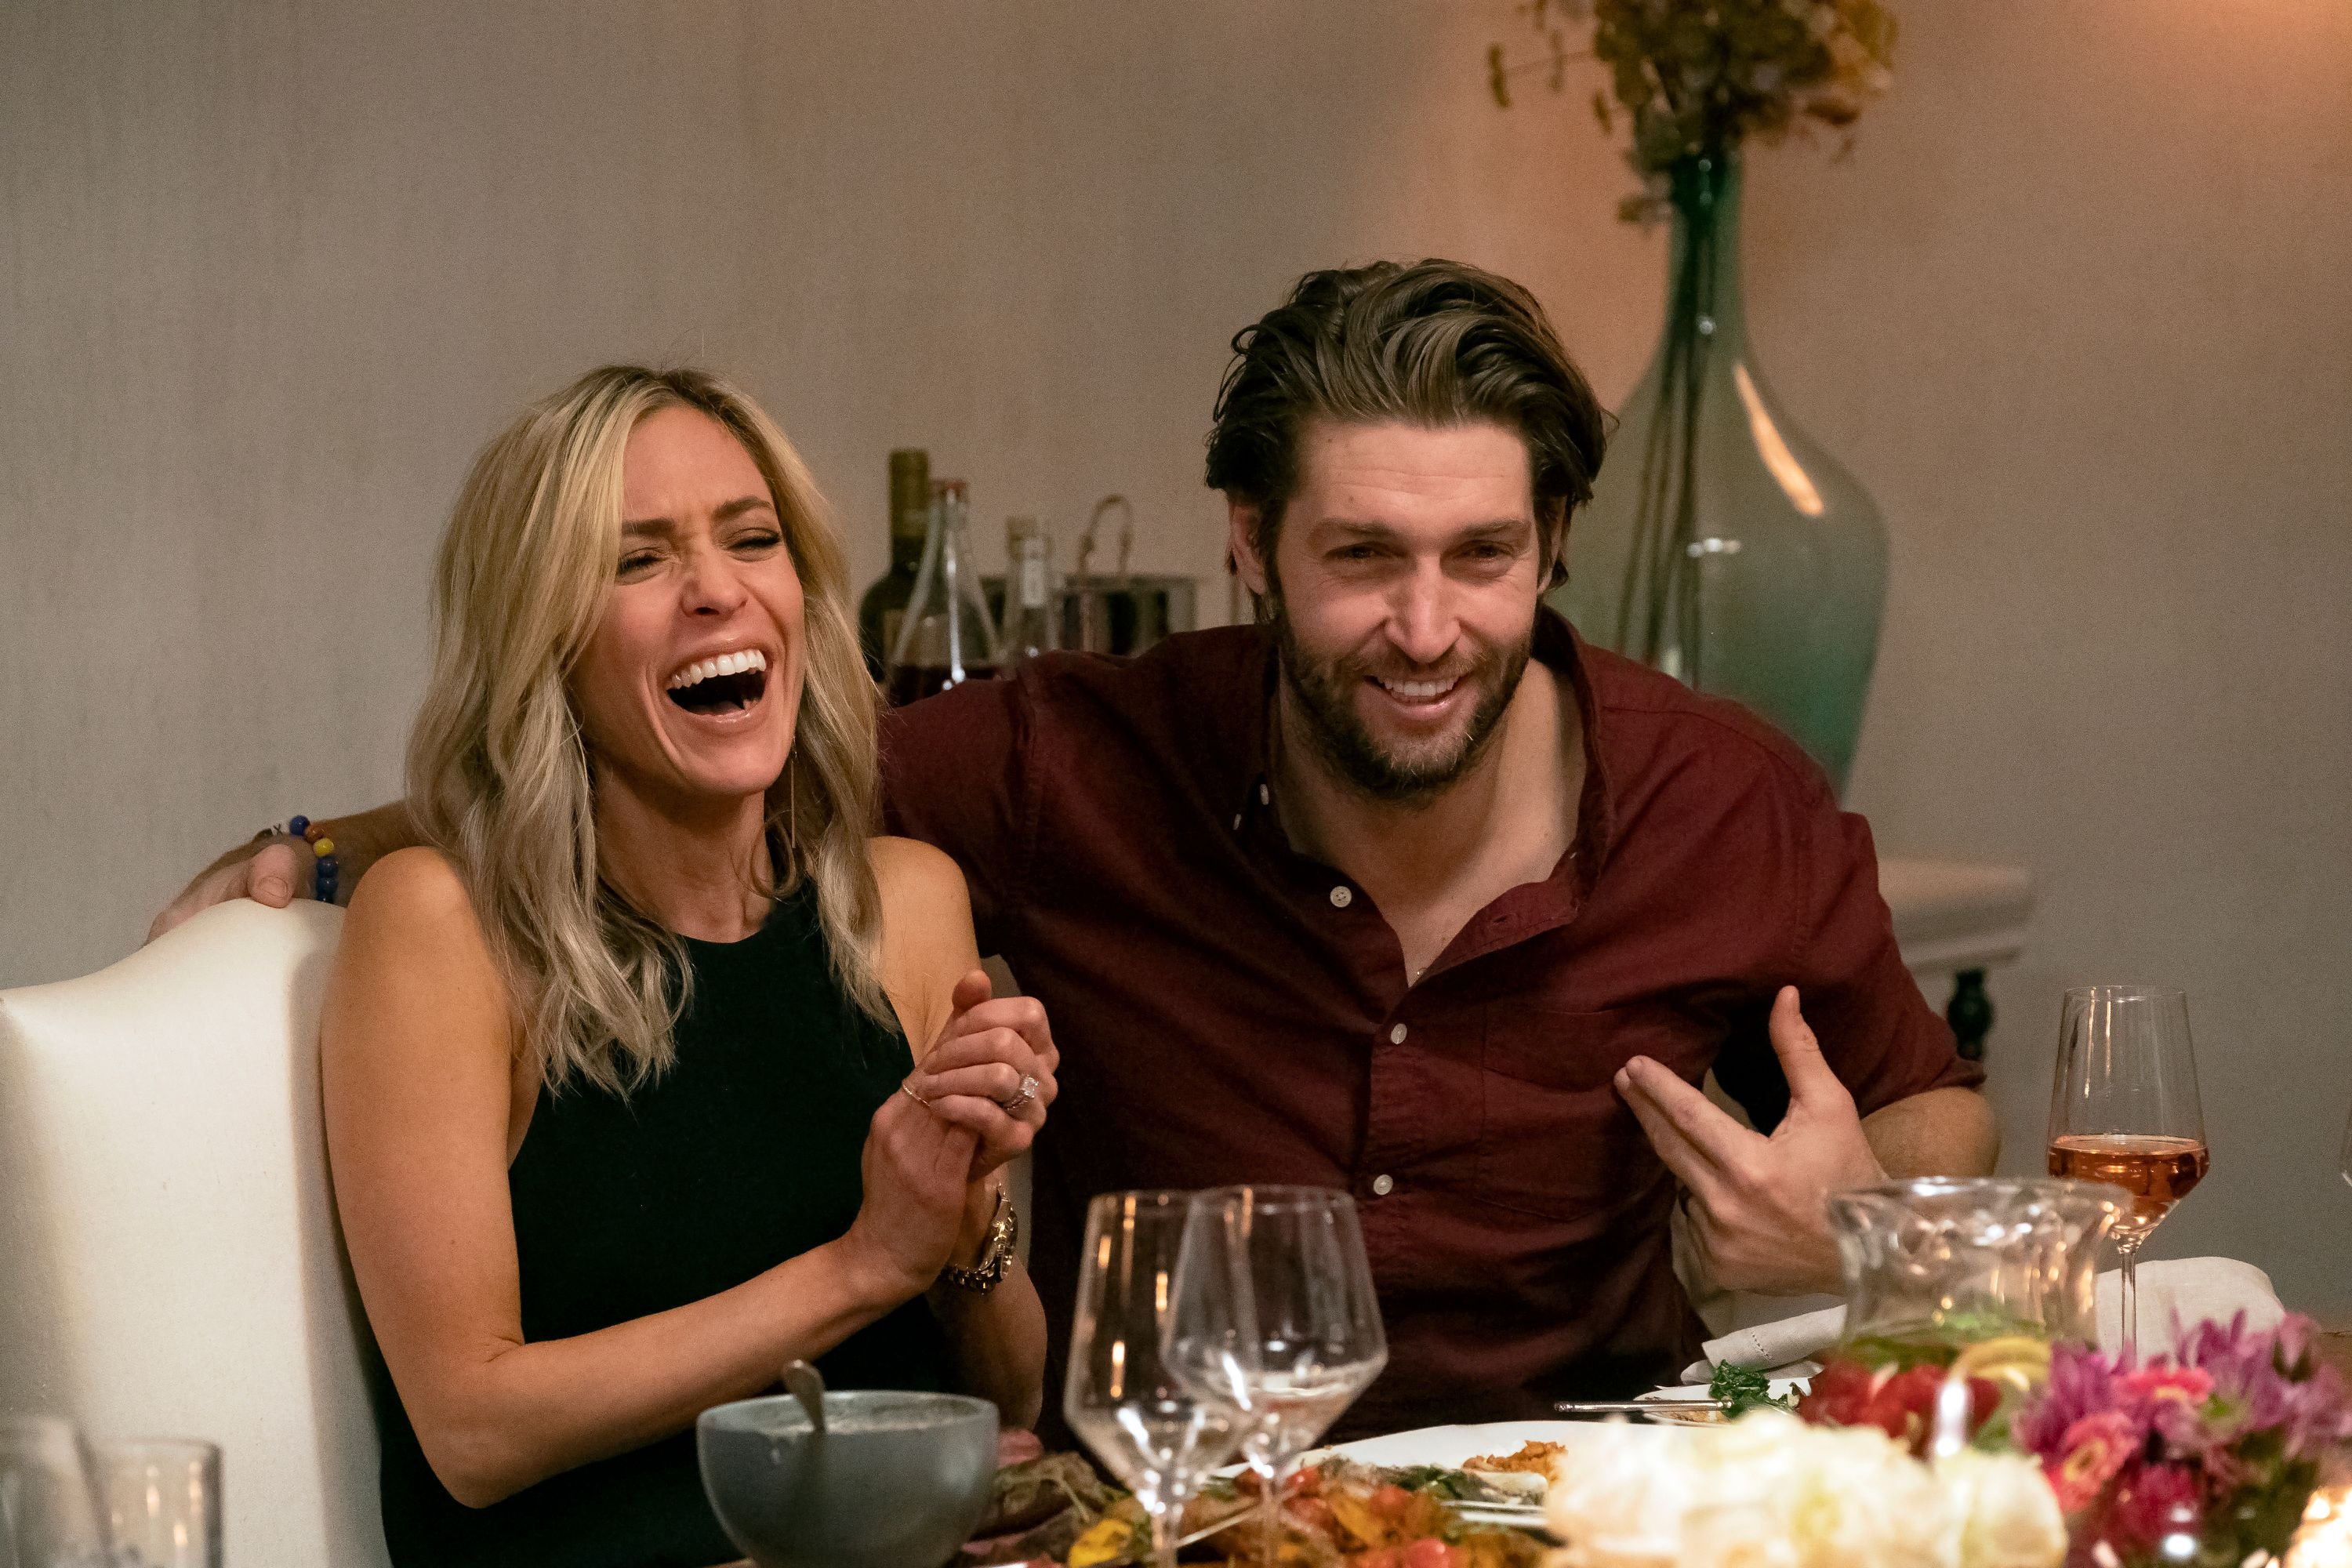 Kristin Cavallari and Jay Cutler on episode 206 of "Very Cavallari." | Source: Getty Images